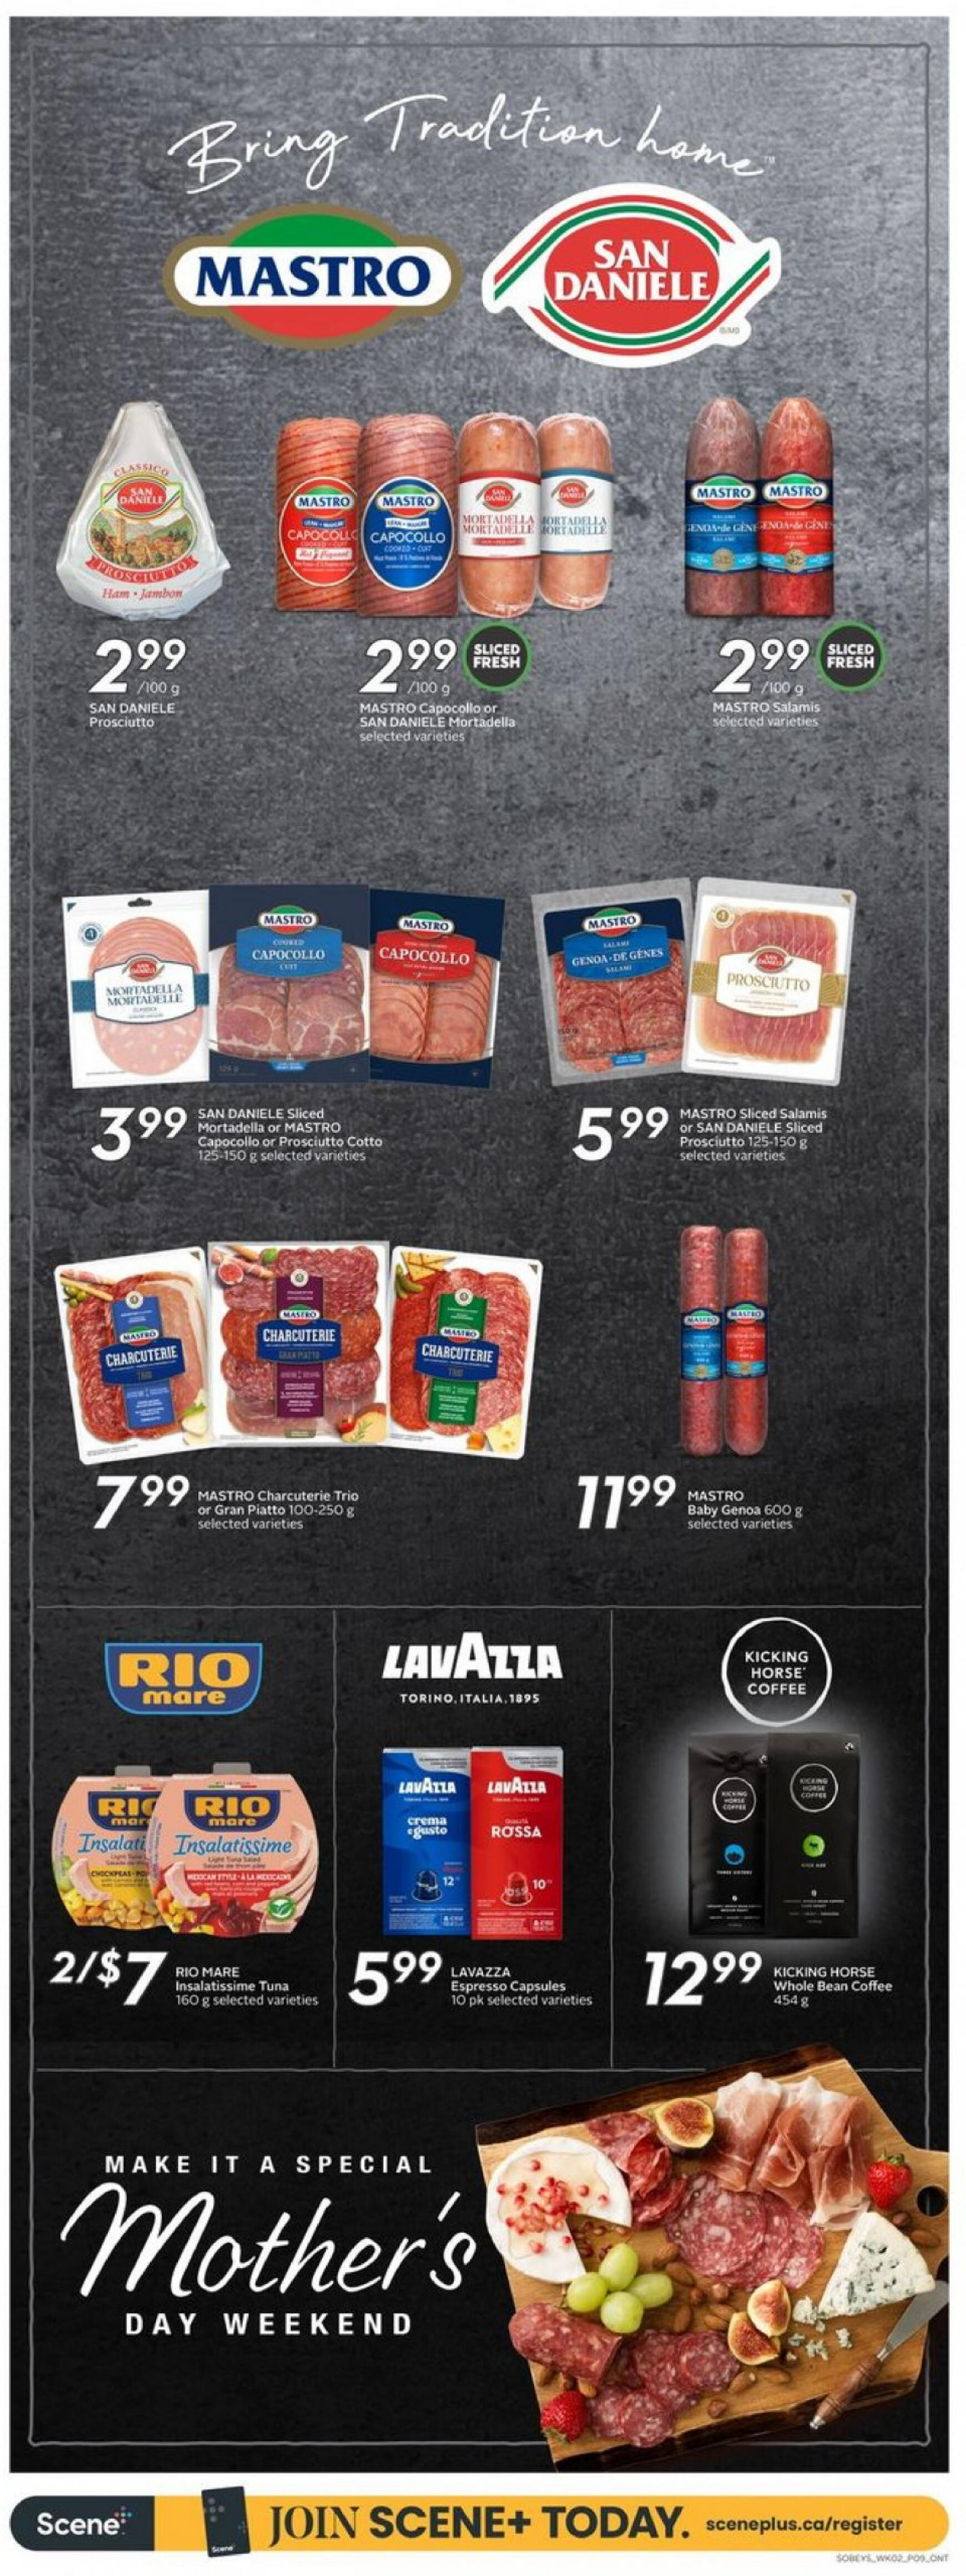 sobeys - Sobeys - Weekly Flyer - Ontario flyer current 09.05. - 15.05. - page: 17